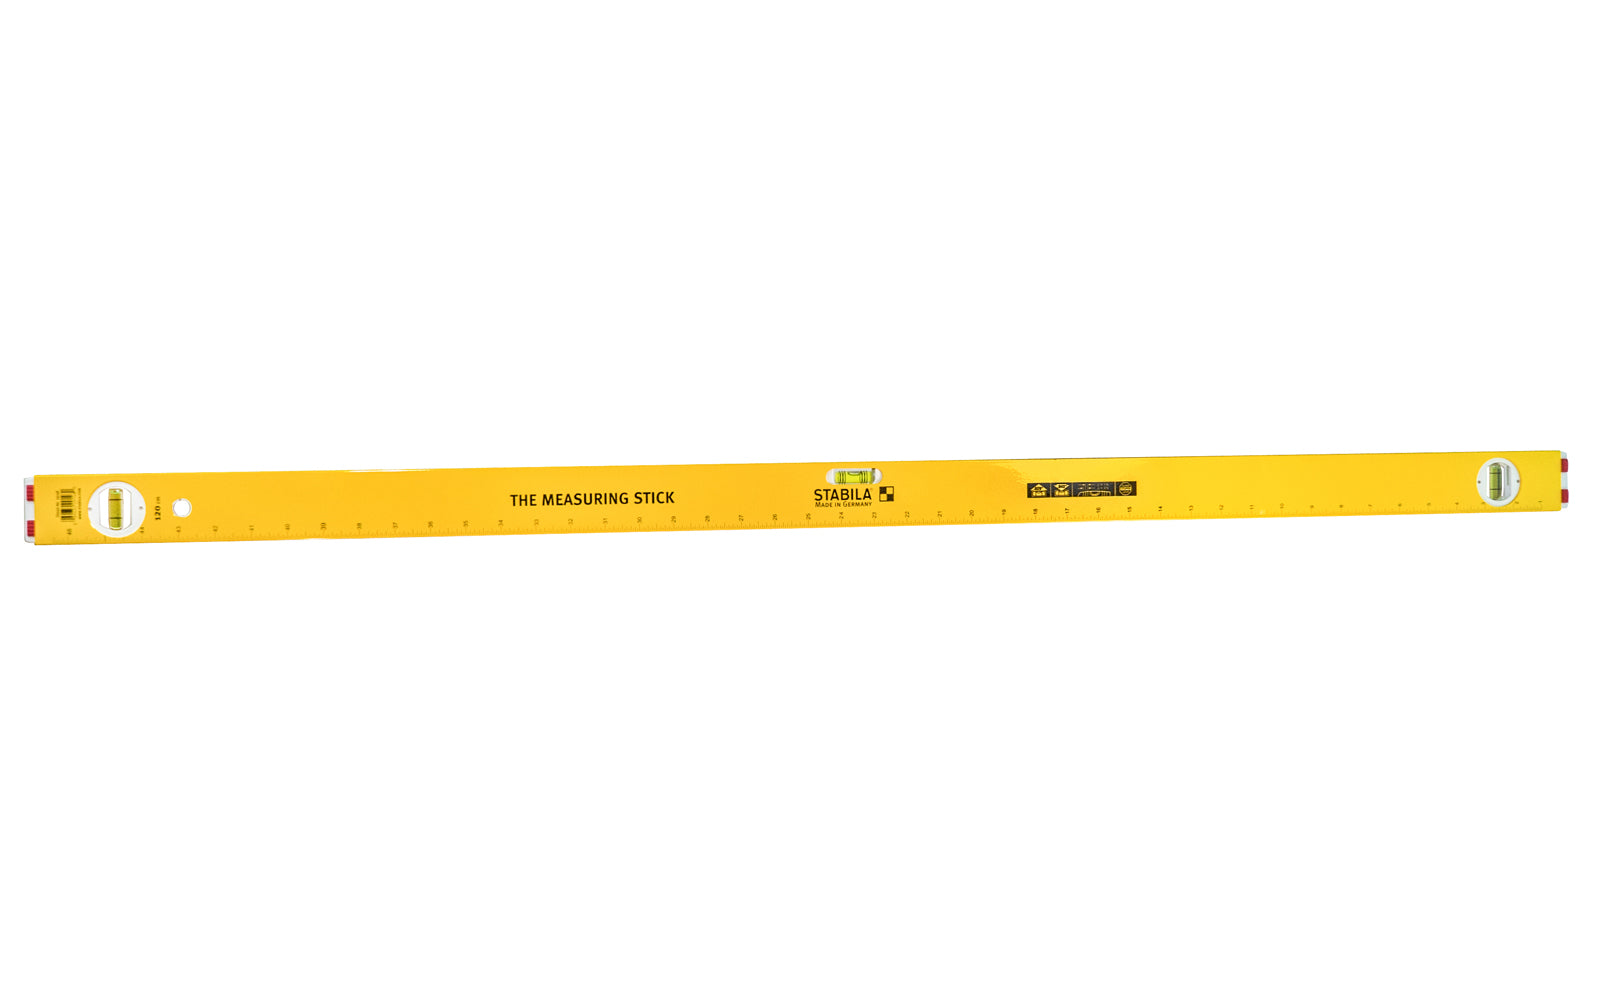 Stabila 48" (120 cm) Measuring Stick Level ~ Type 80-A-2 -Measuring Stick is designed for professional remodeling, reconstruction & restoration, A kitchen, bath, closet or basement re-model will go faster & easier with this tool